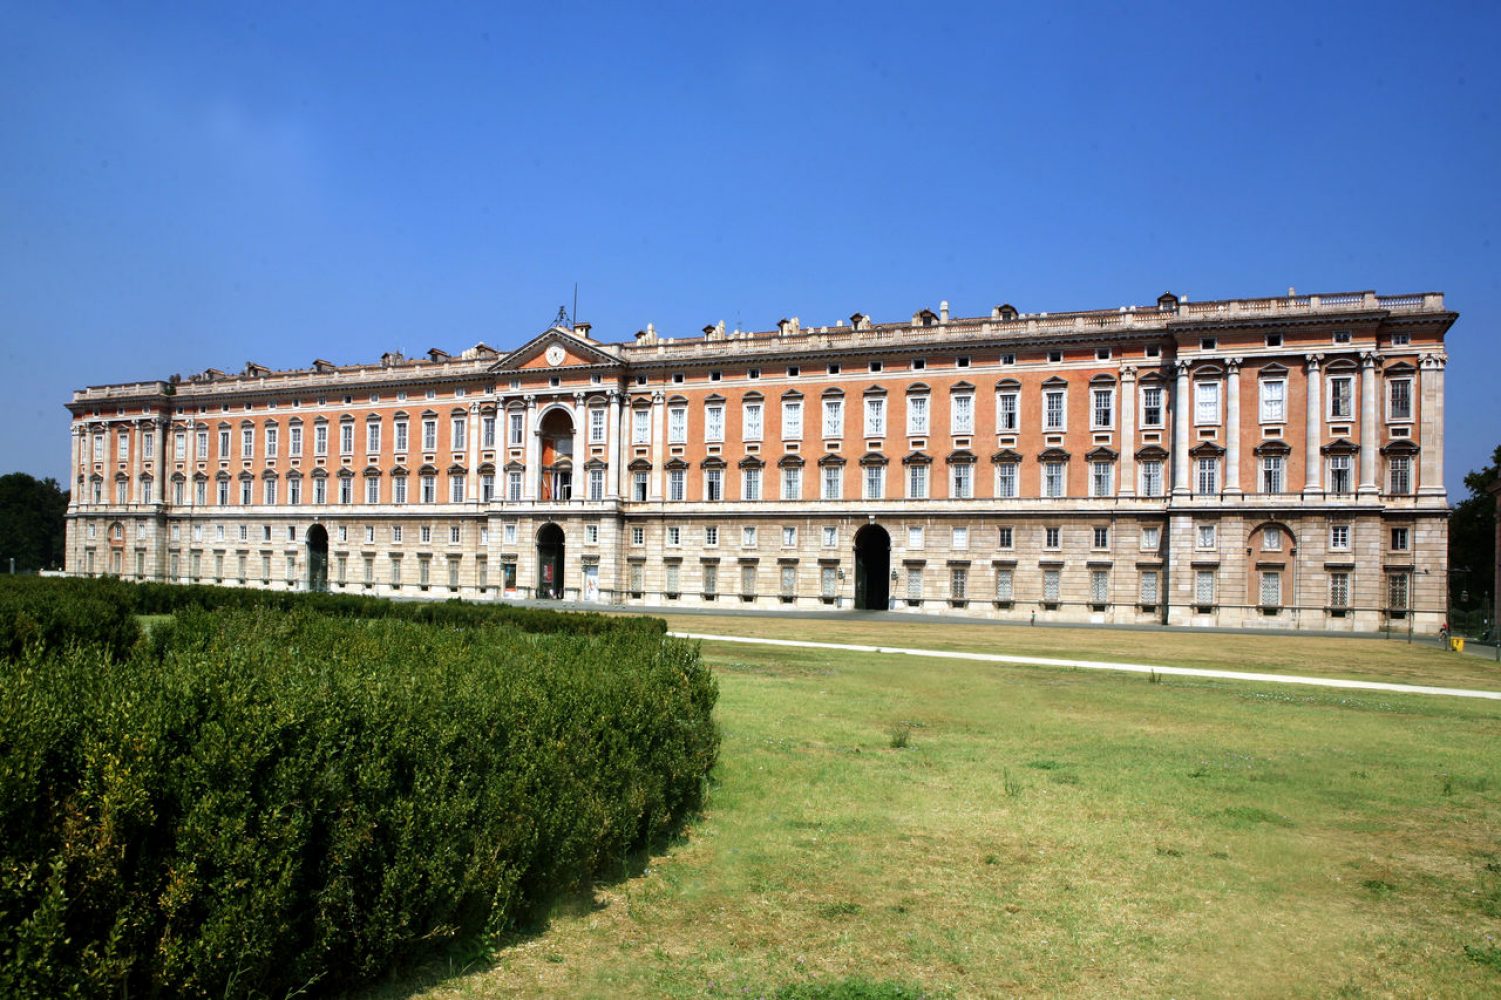 Royal Palace of Caserta and its gardens - Italia.it